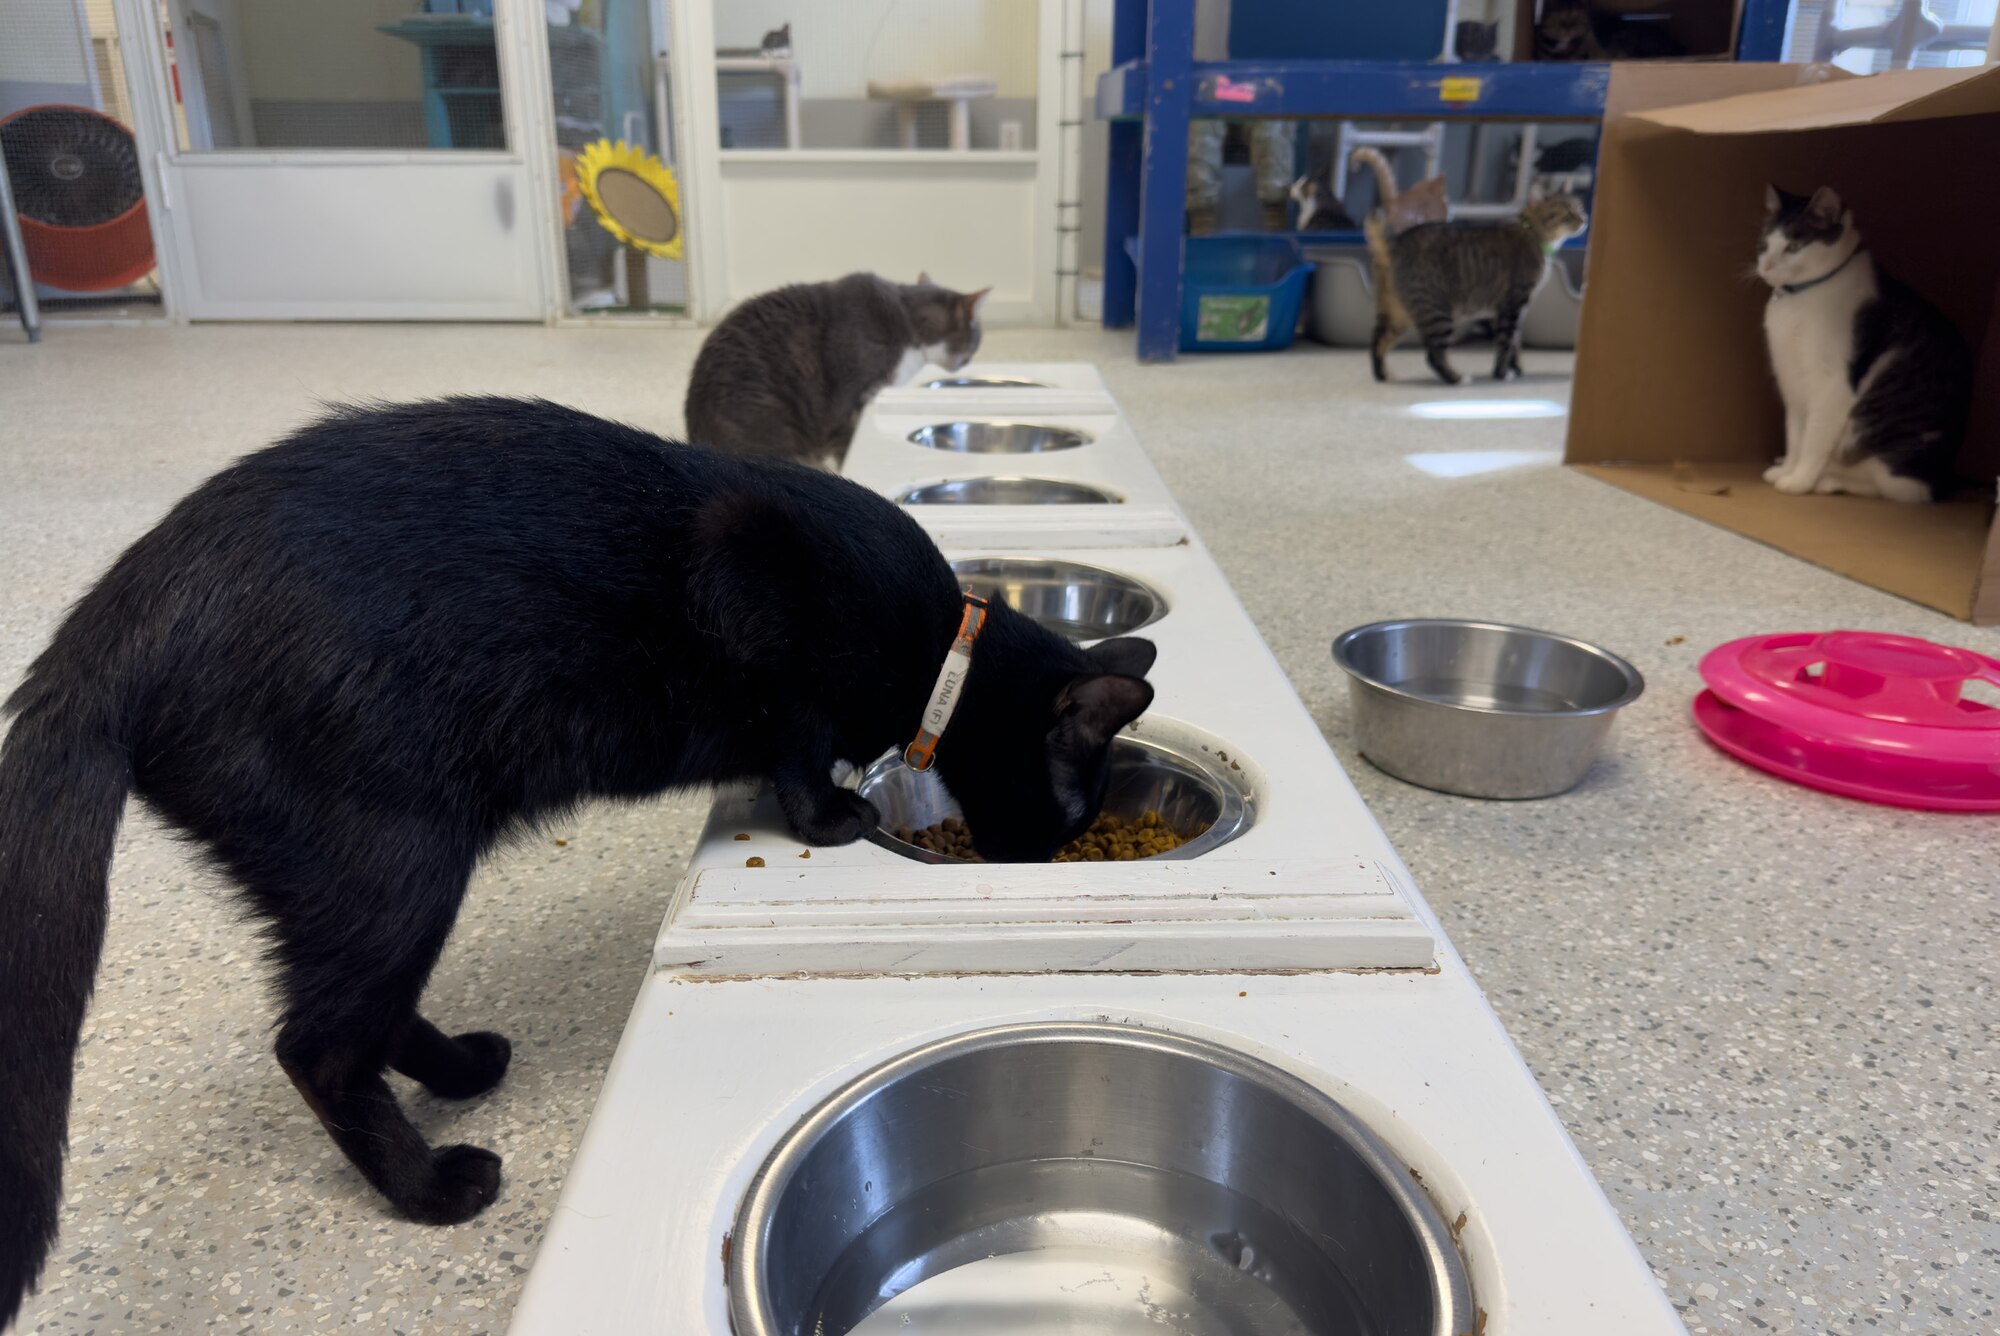 A black cat drinks from a row of water bowls in a pet shelter room with other cats. Another cat hides out in a box, while another casually walks by the box.